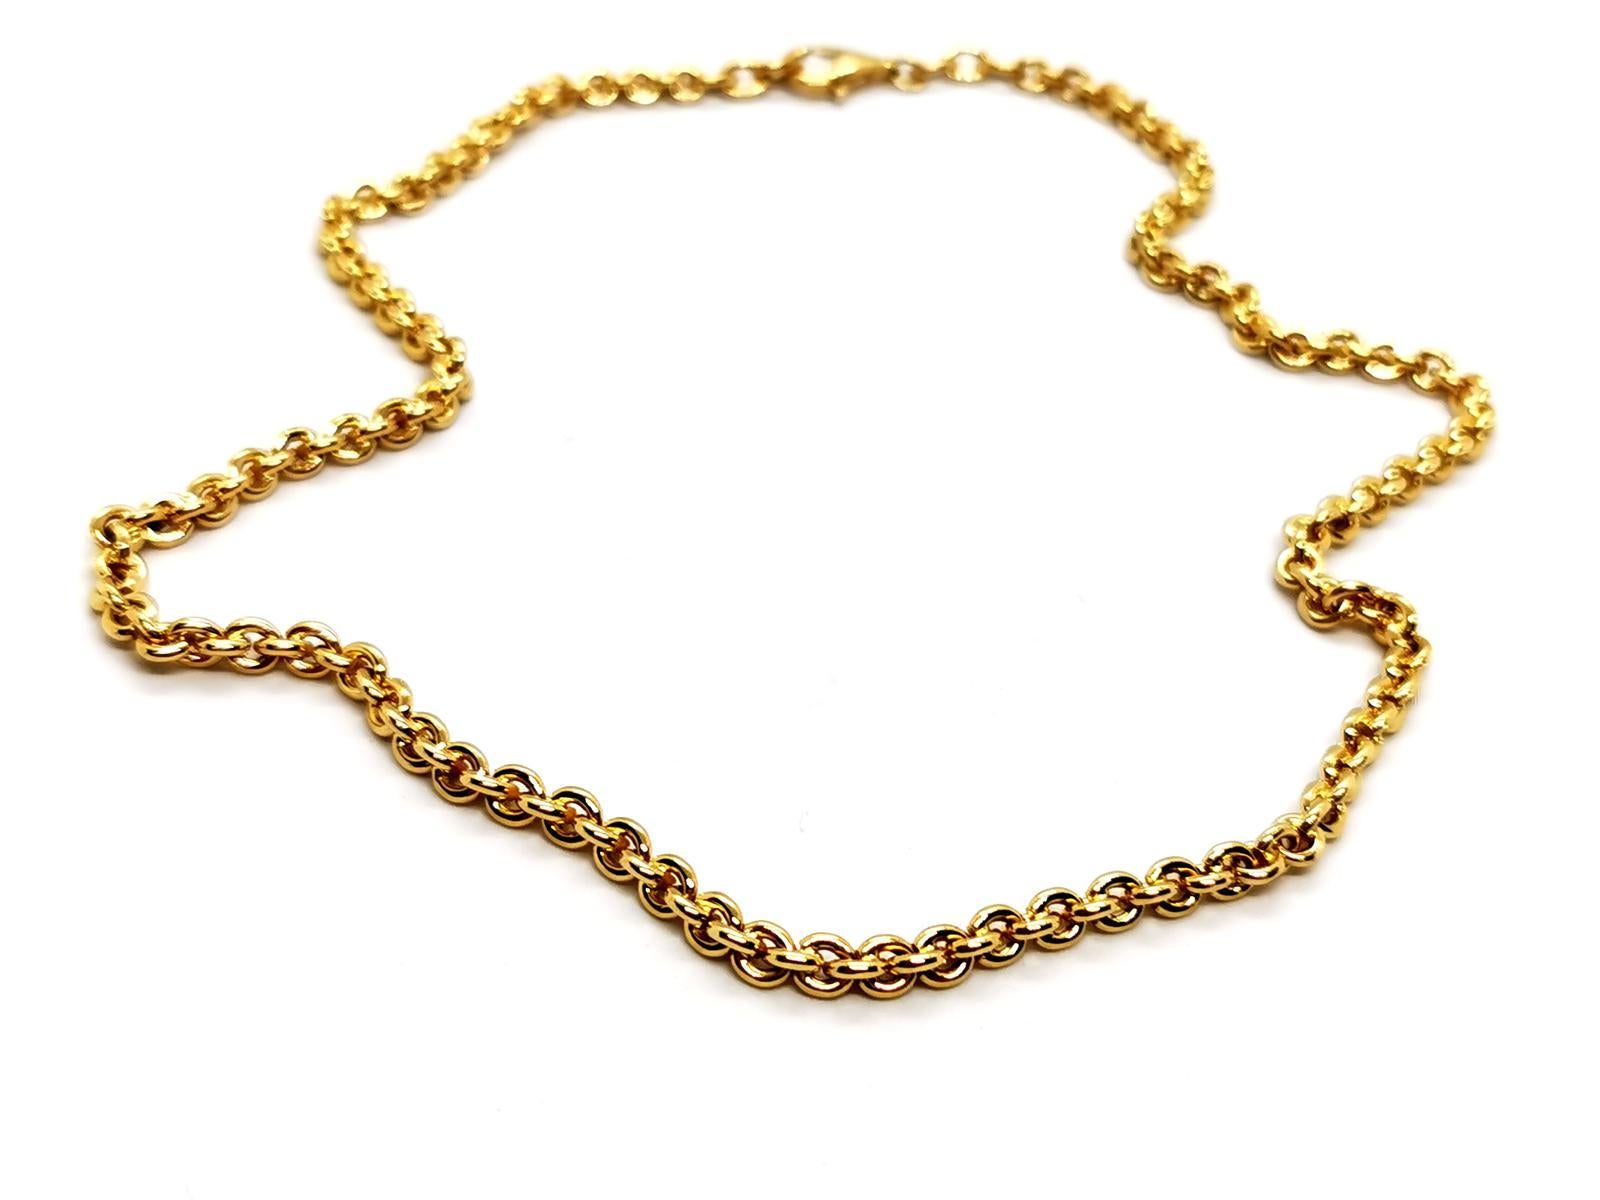 Gold necklace yellow 750 mils (18 carats). chain mesh jaseron mass. length: 44 cm. width: 0.44 cm. total weight: 35.18 g. eagle punch head on the hook (a half deleted). excellent condition
